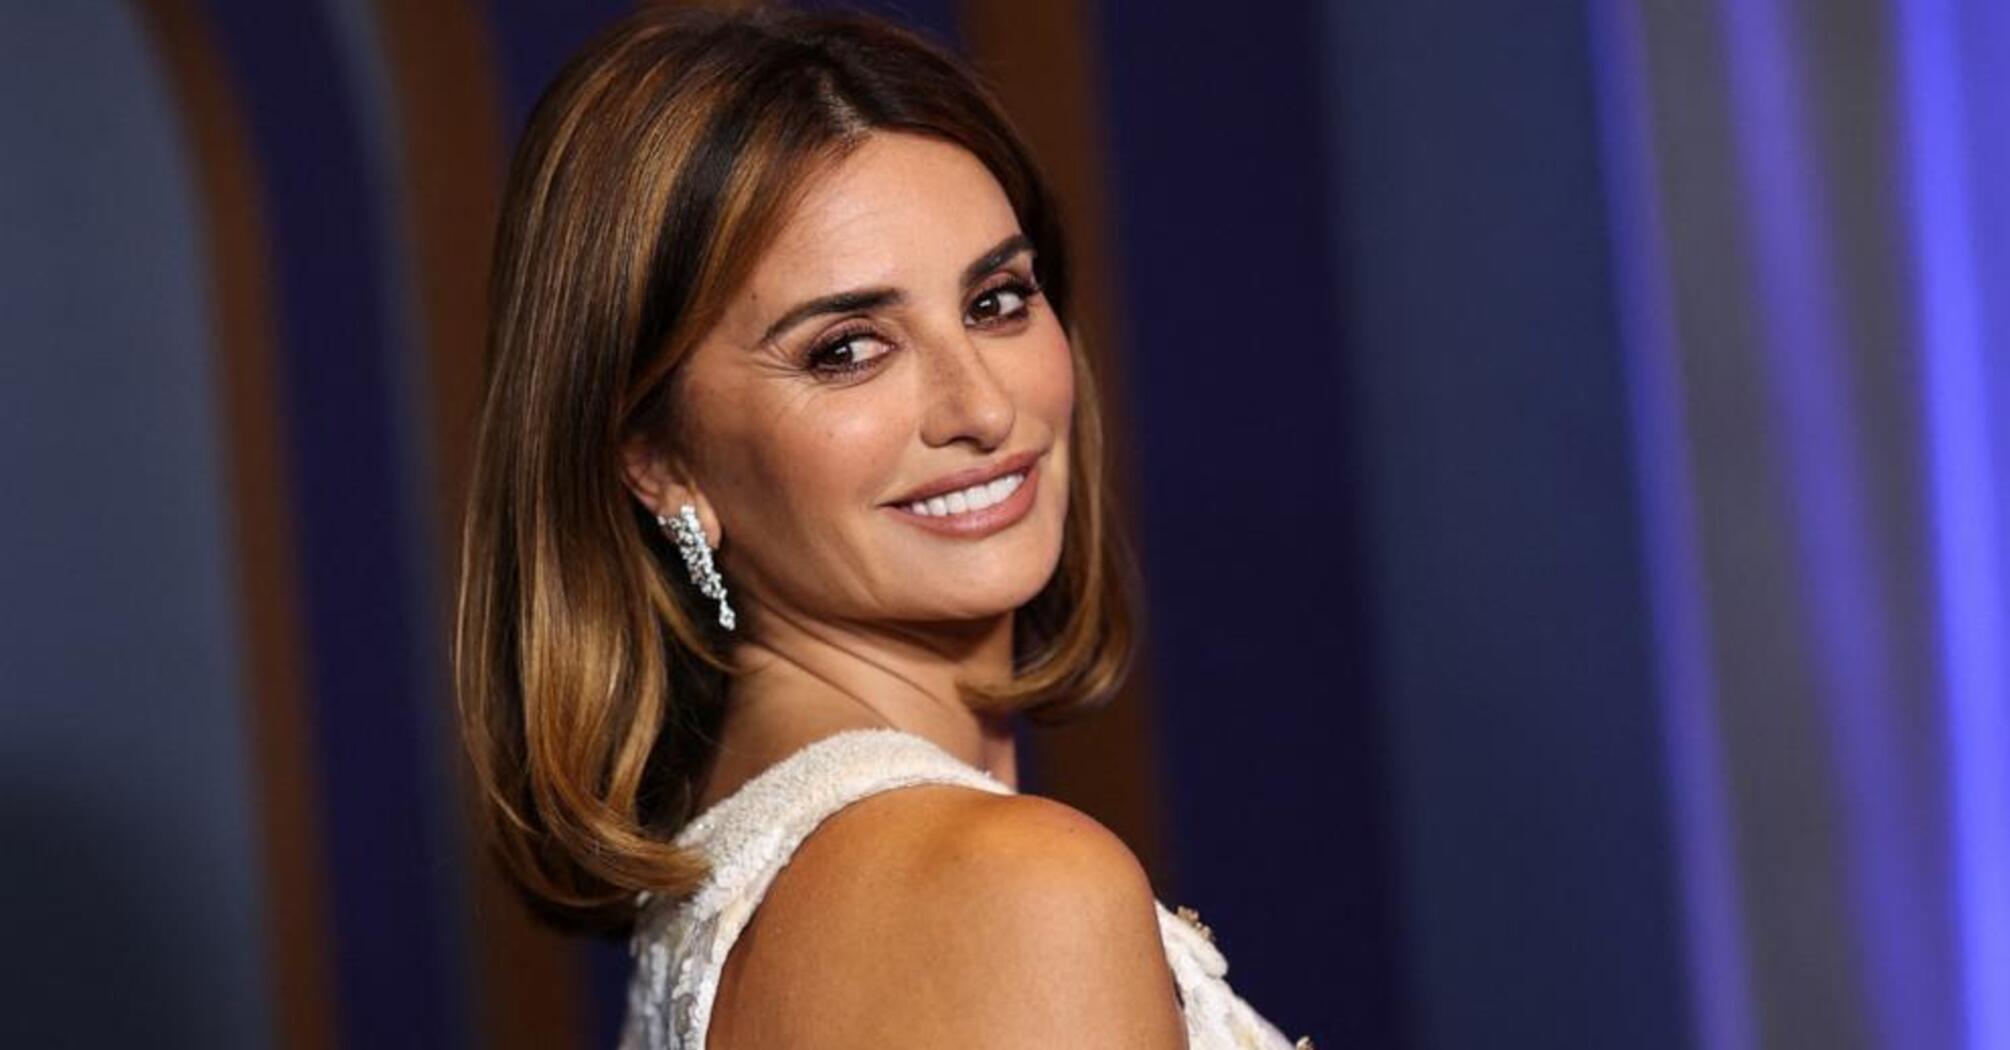 10 Fascinating Facts About Penelope Cruz